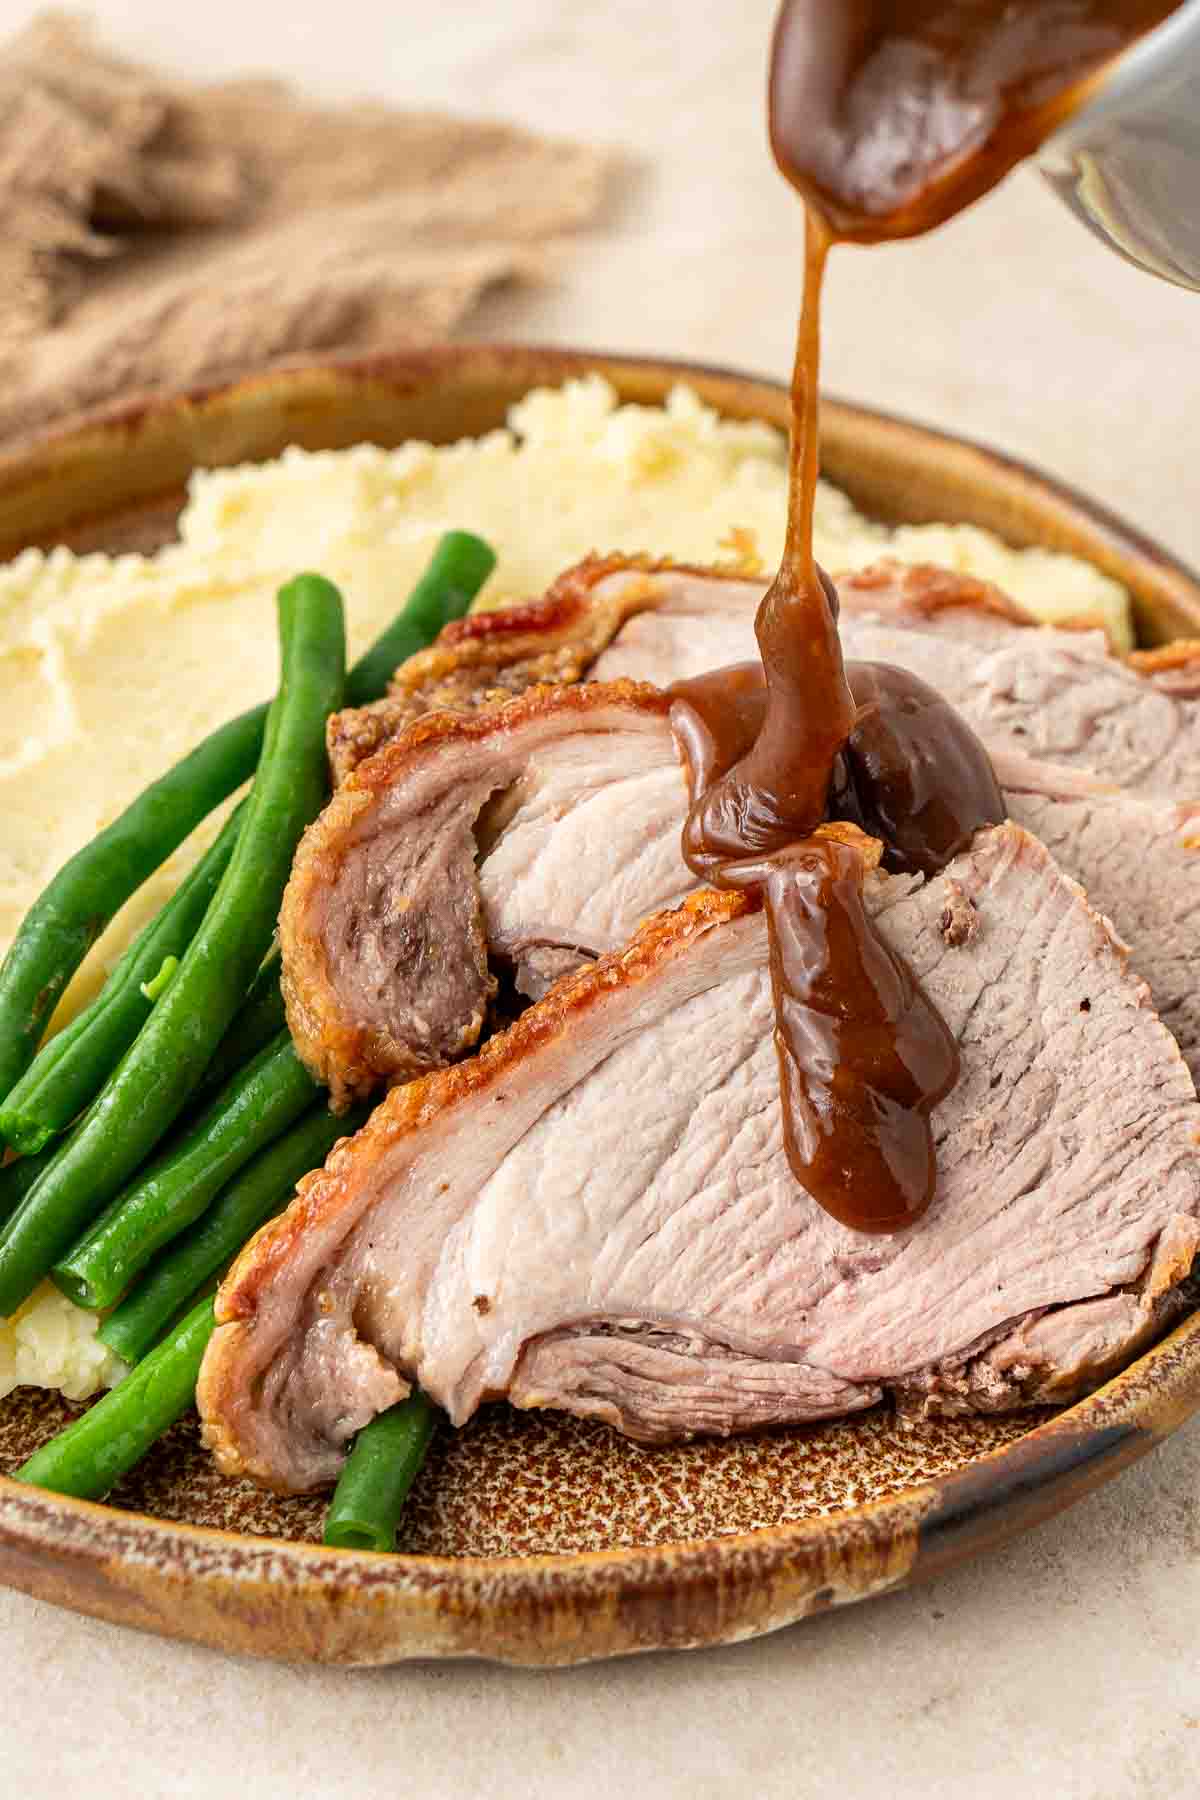 Gravy being drizzled over pork roast slices on a plate with green beans and mashed potato.